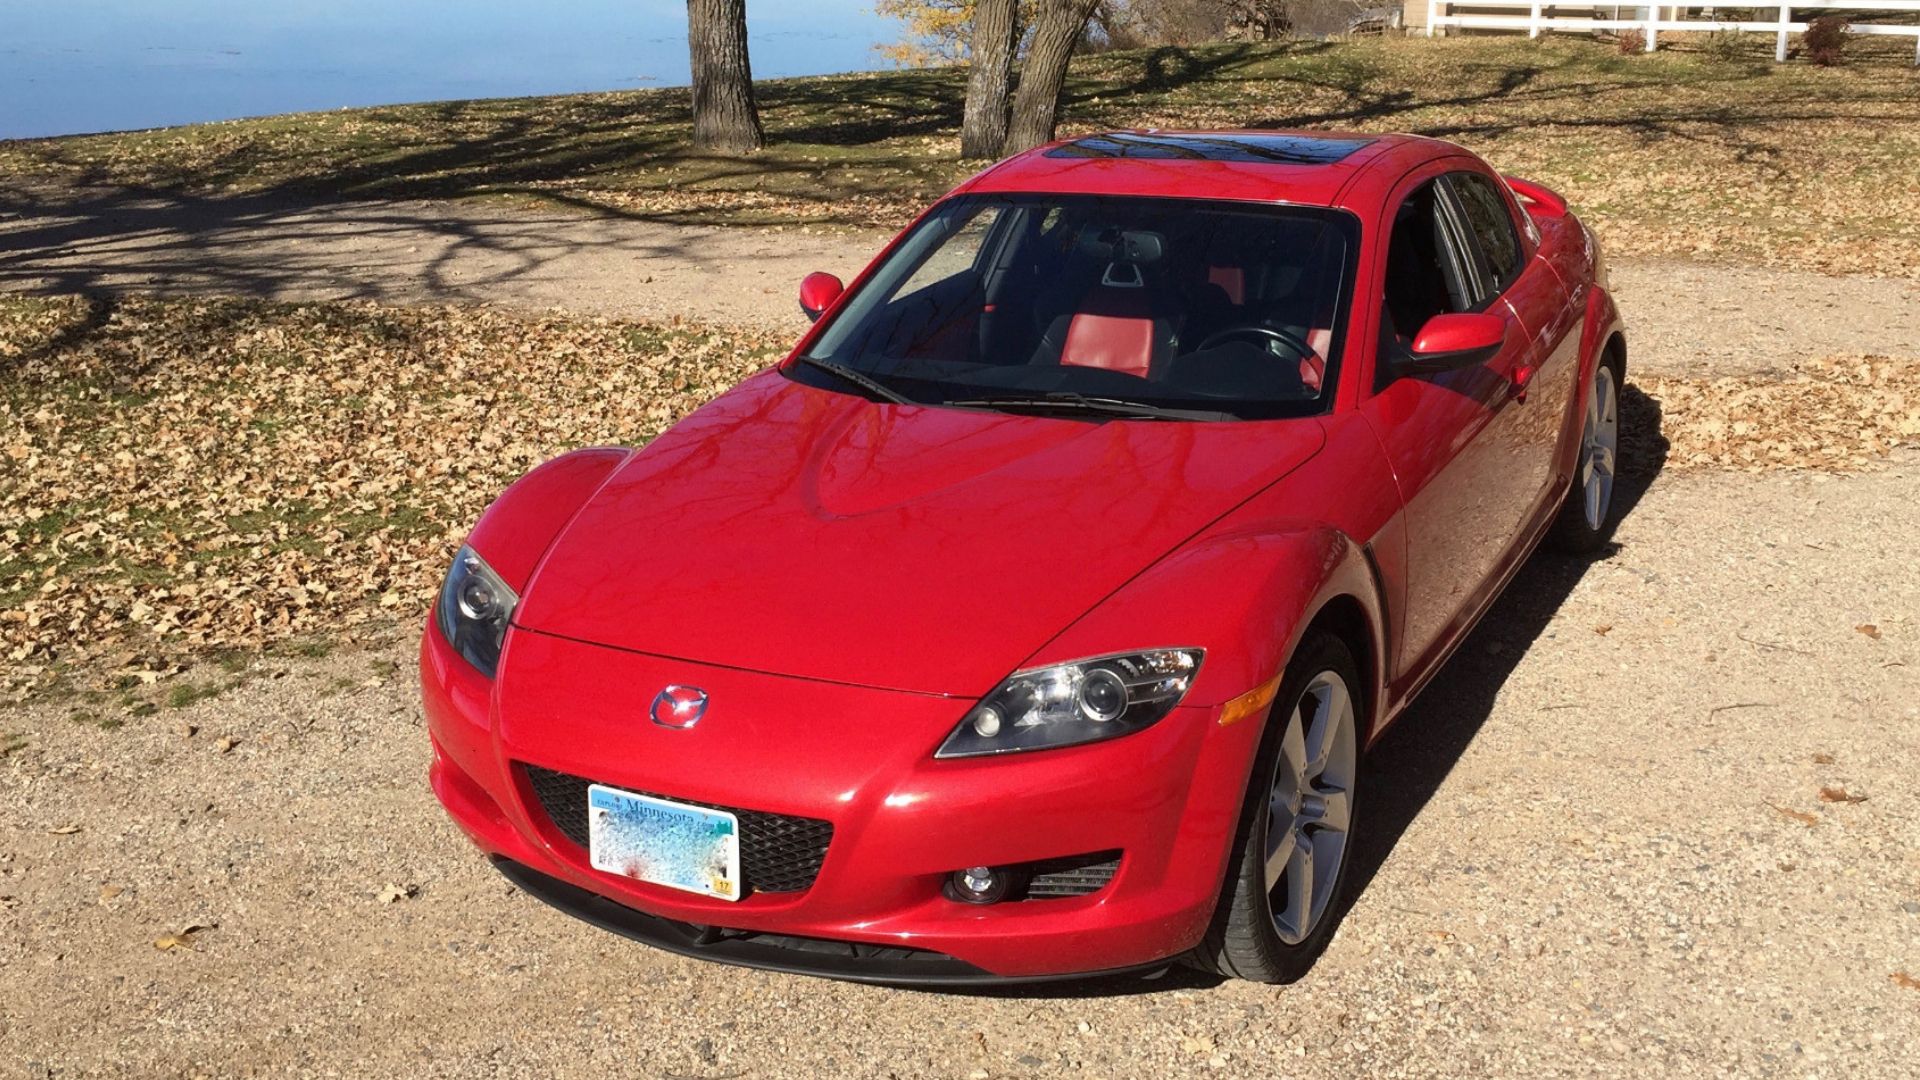 2004 Mazda RX-8 in red posing in front of lake